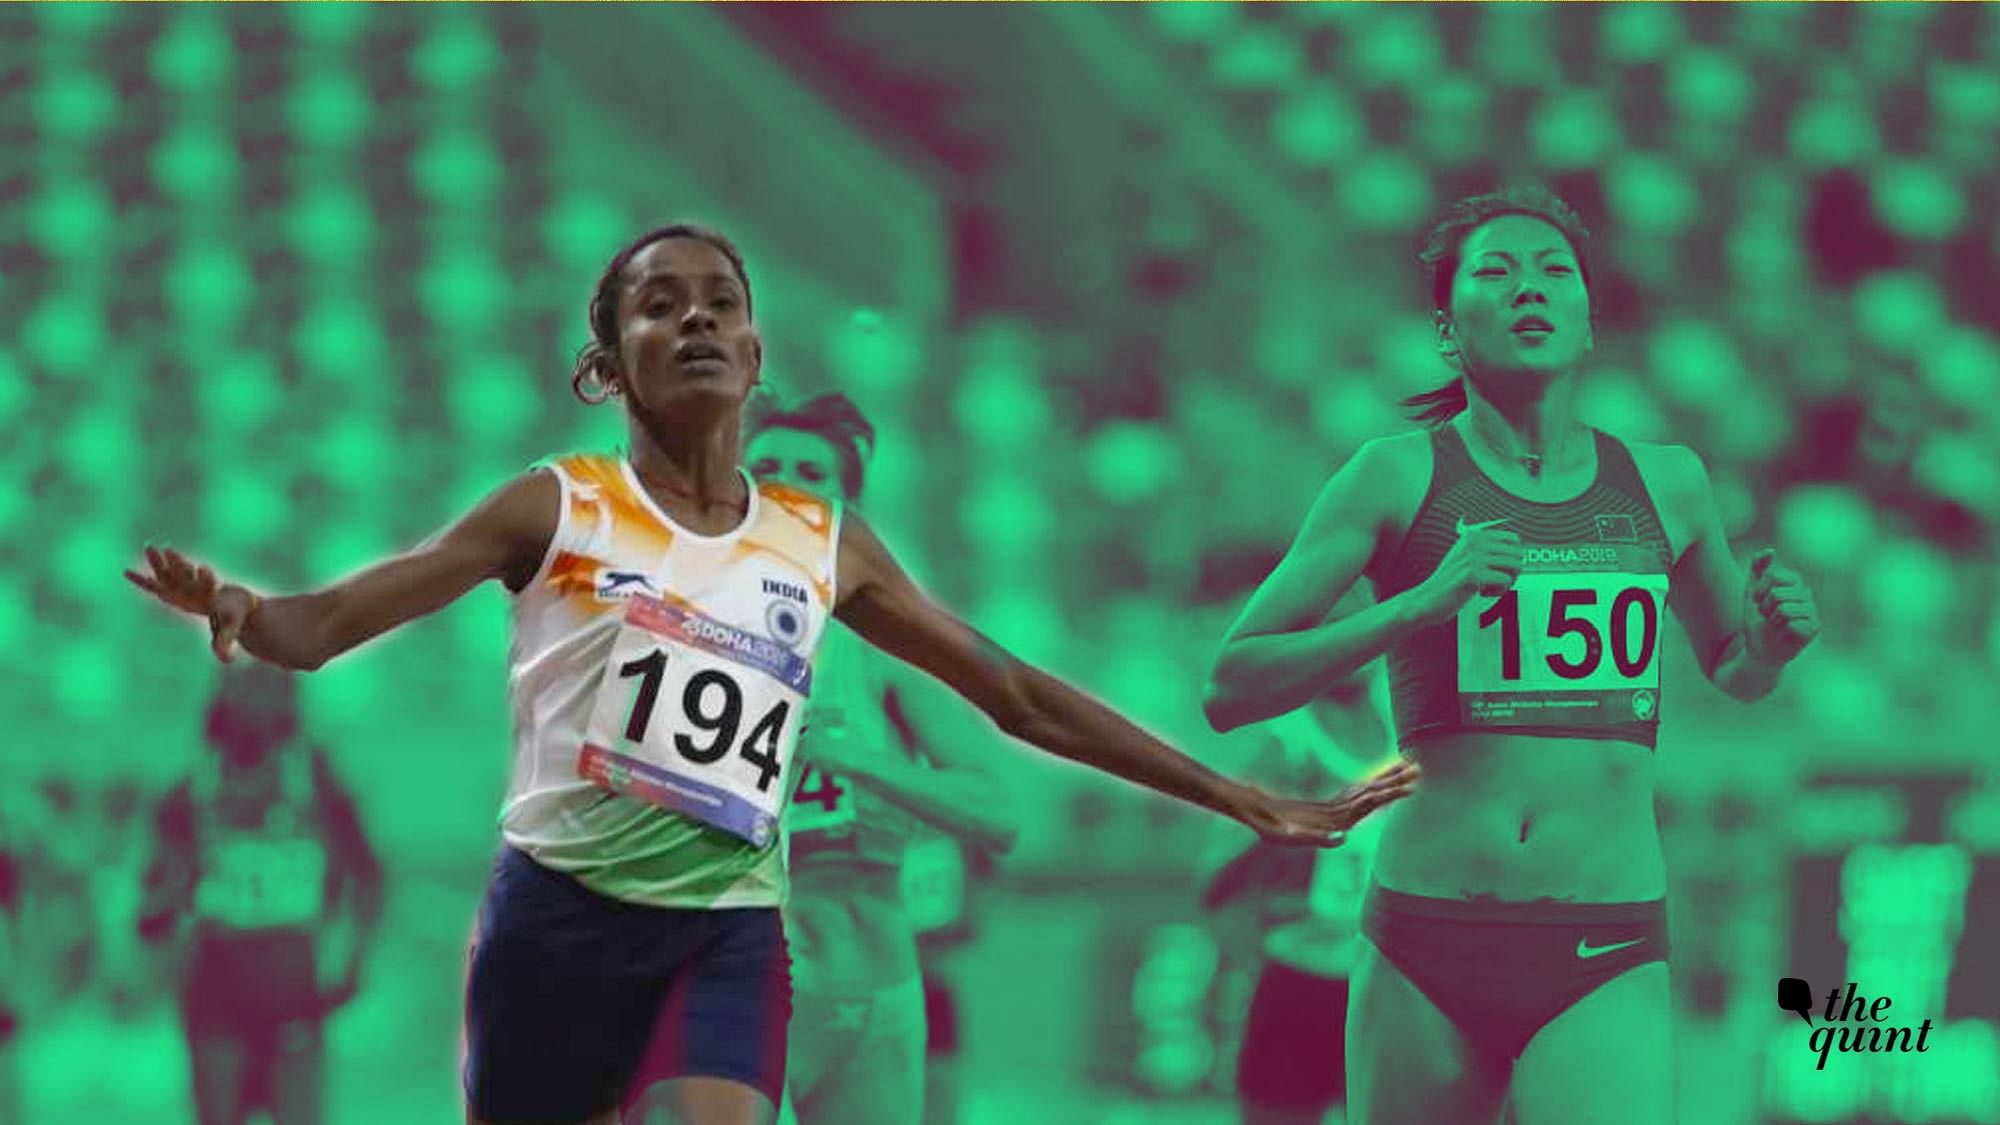 Gomathi Marimuthu surprised the world by clinching a gold in the event at the Asian Athletics Championships in Doha.